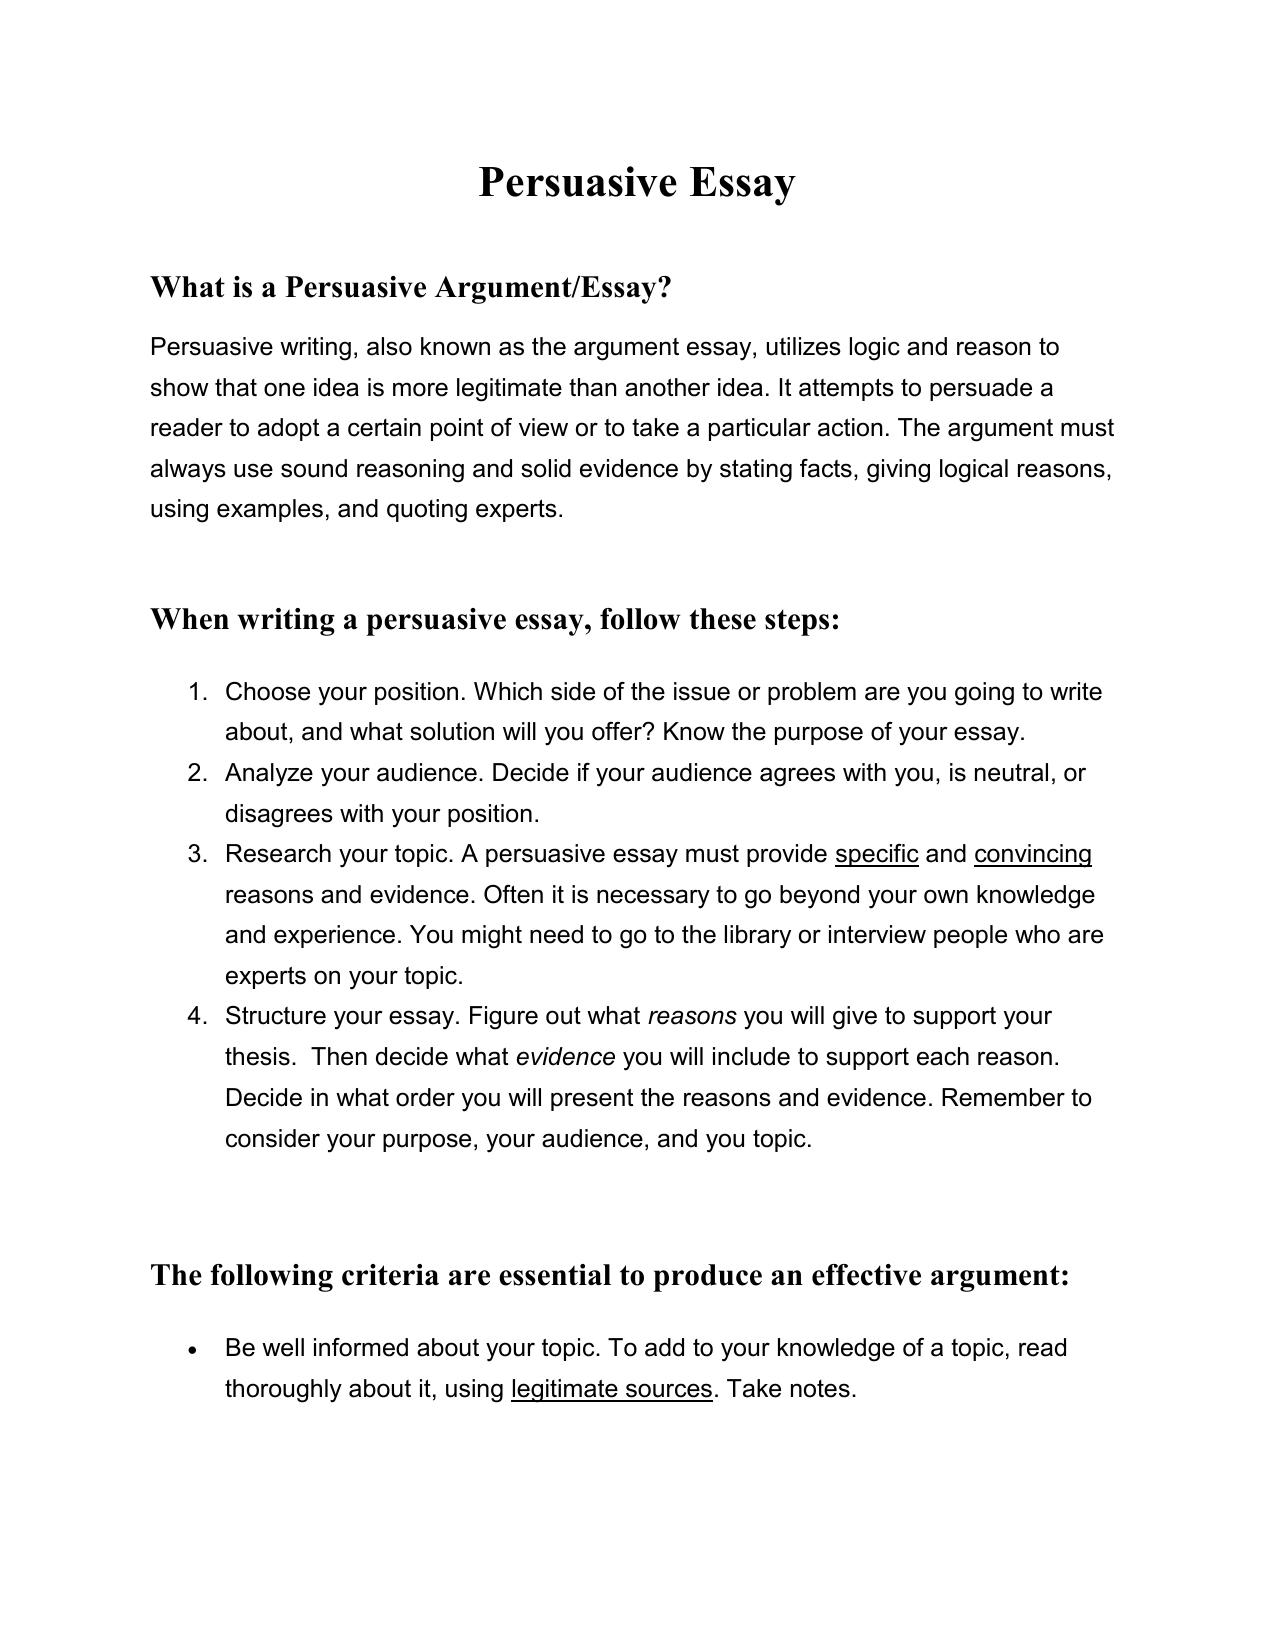 what is a persuasive argument essay